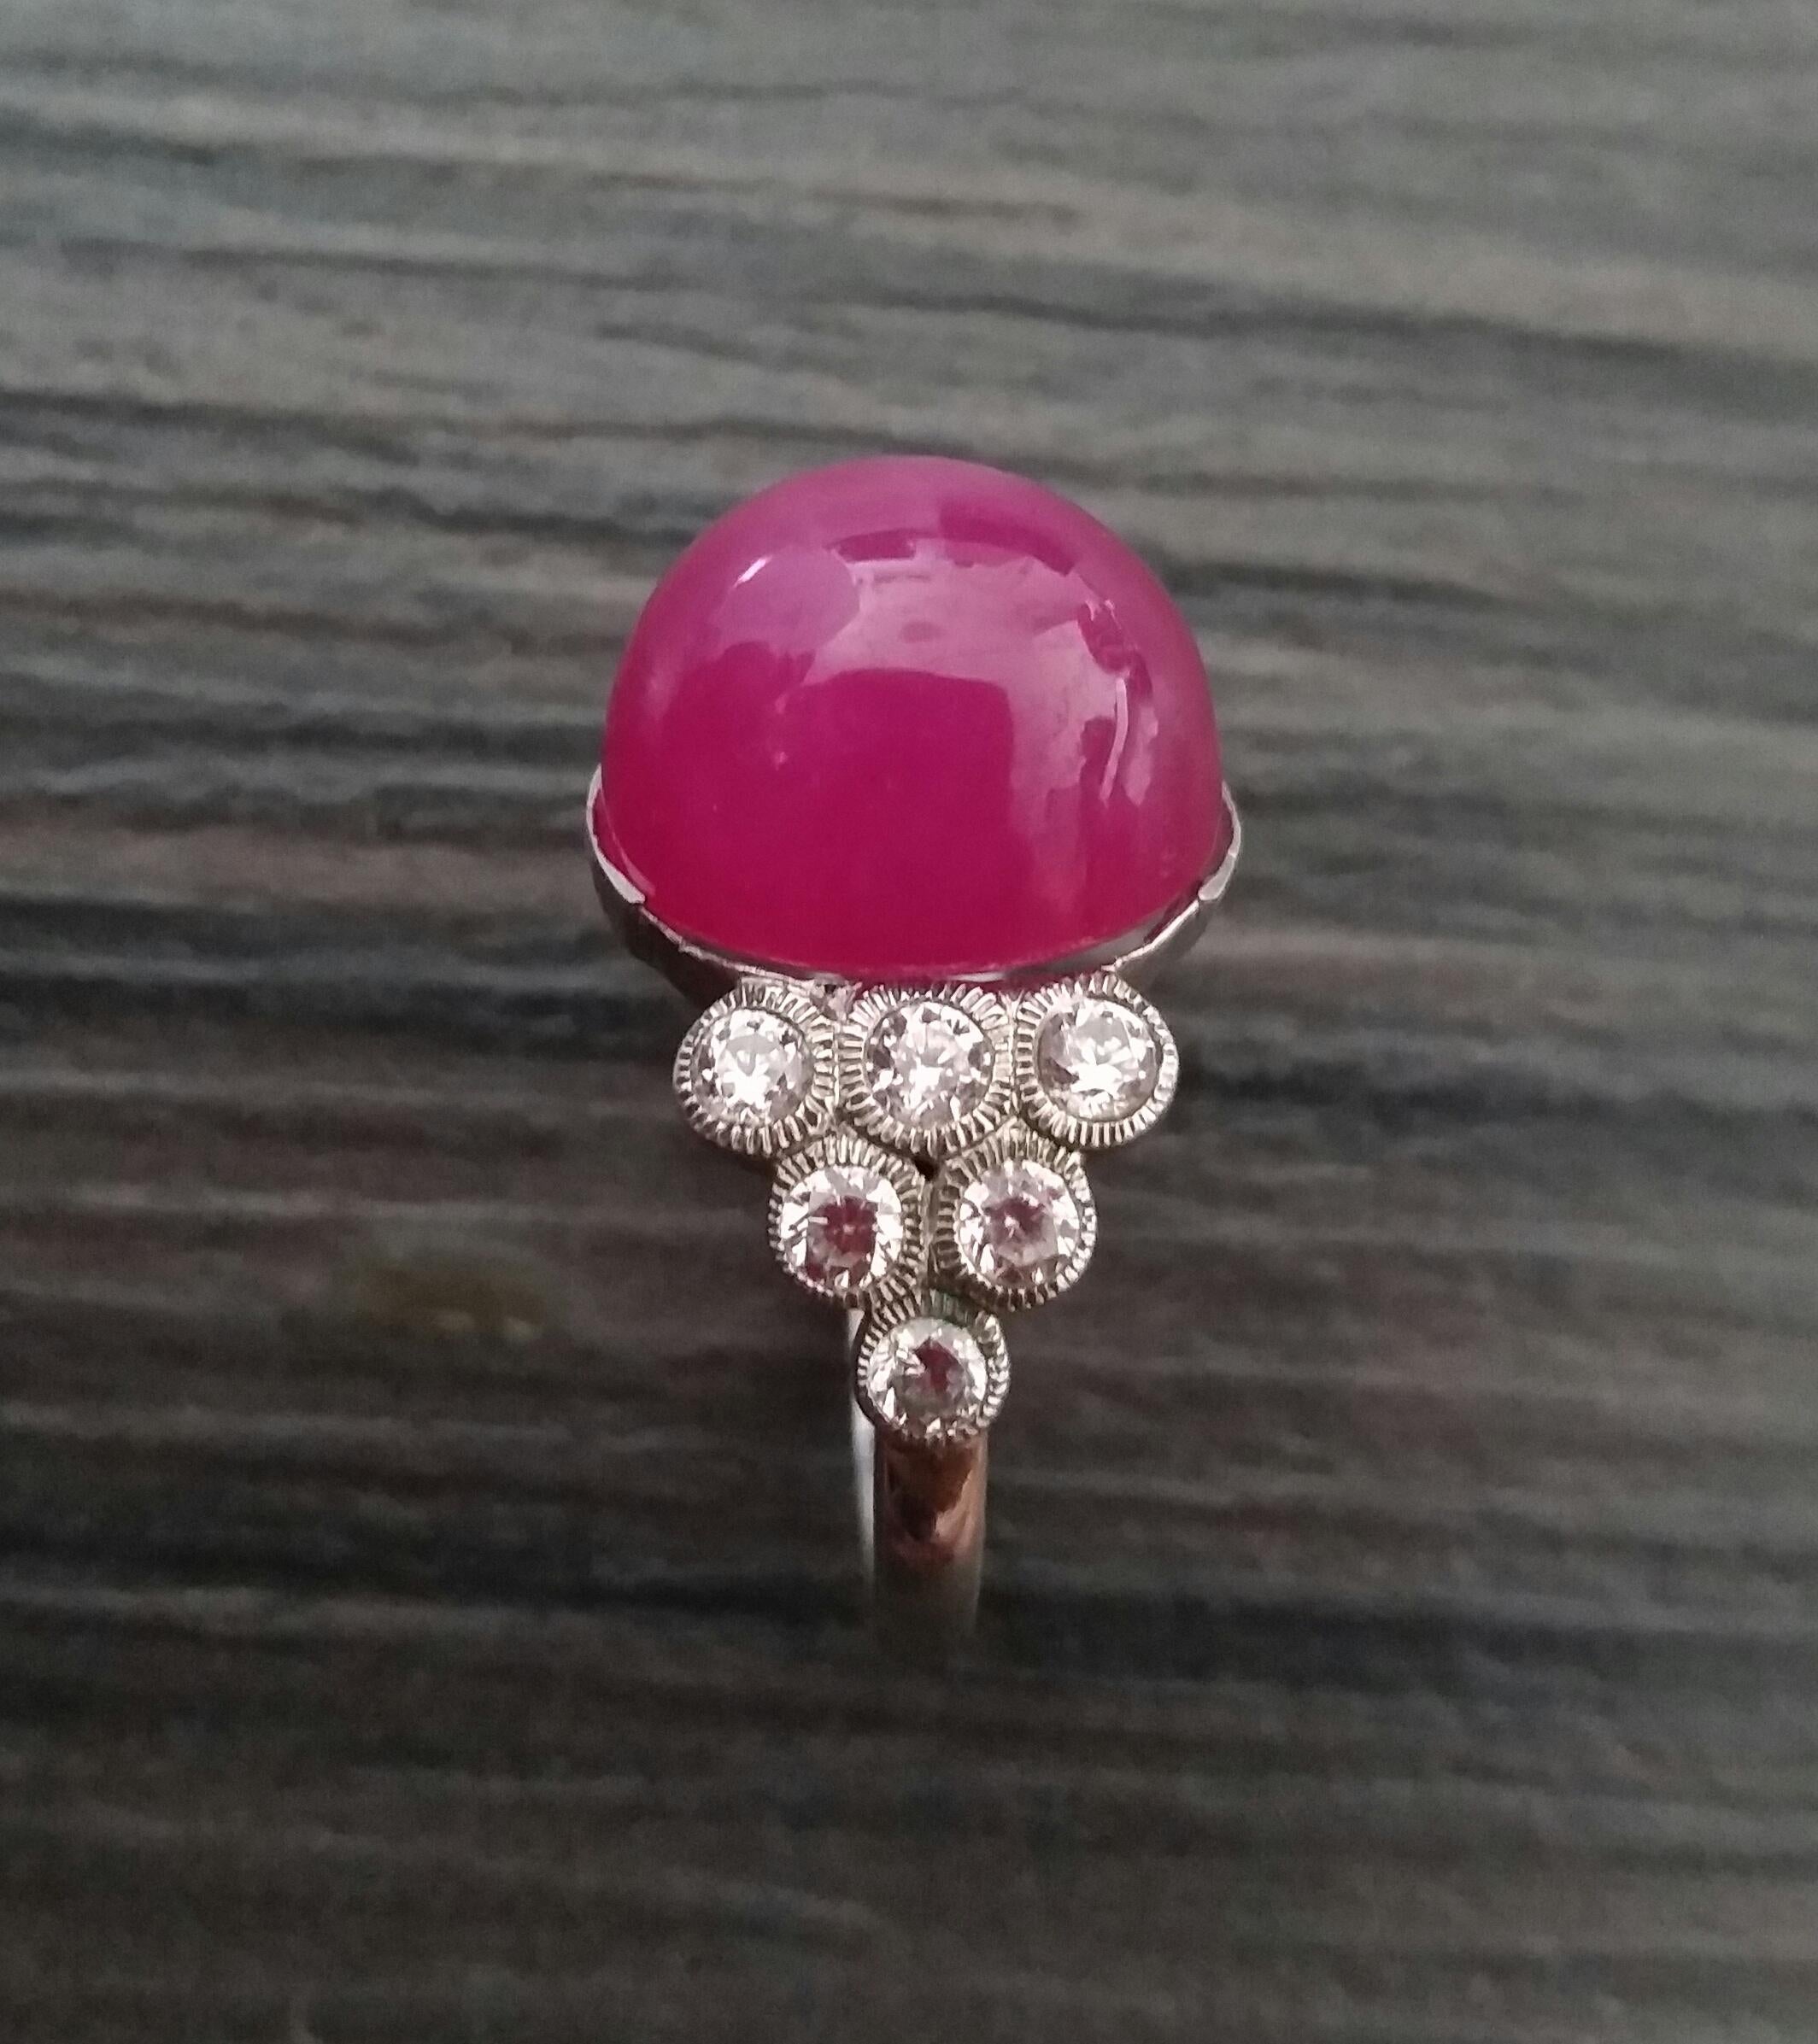 17 Carat Ruby Oval Cabochon 14 Kt Gold 12 Full Cut Round Diamonds Cocktail Ring For Sale 4